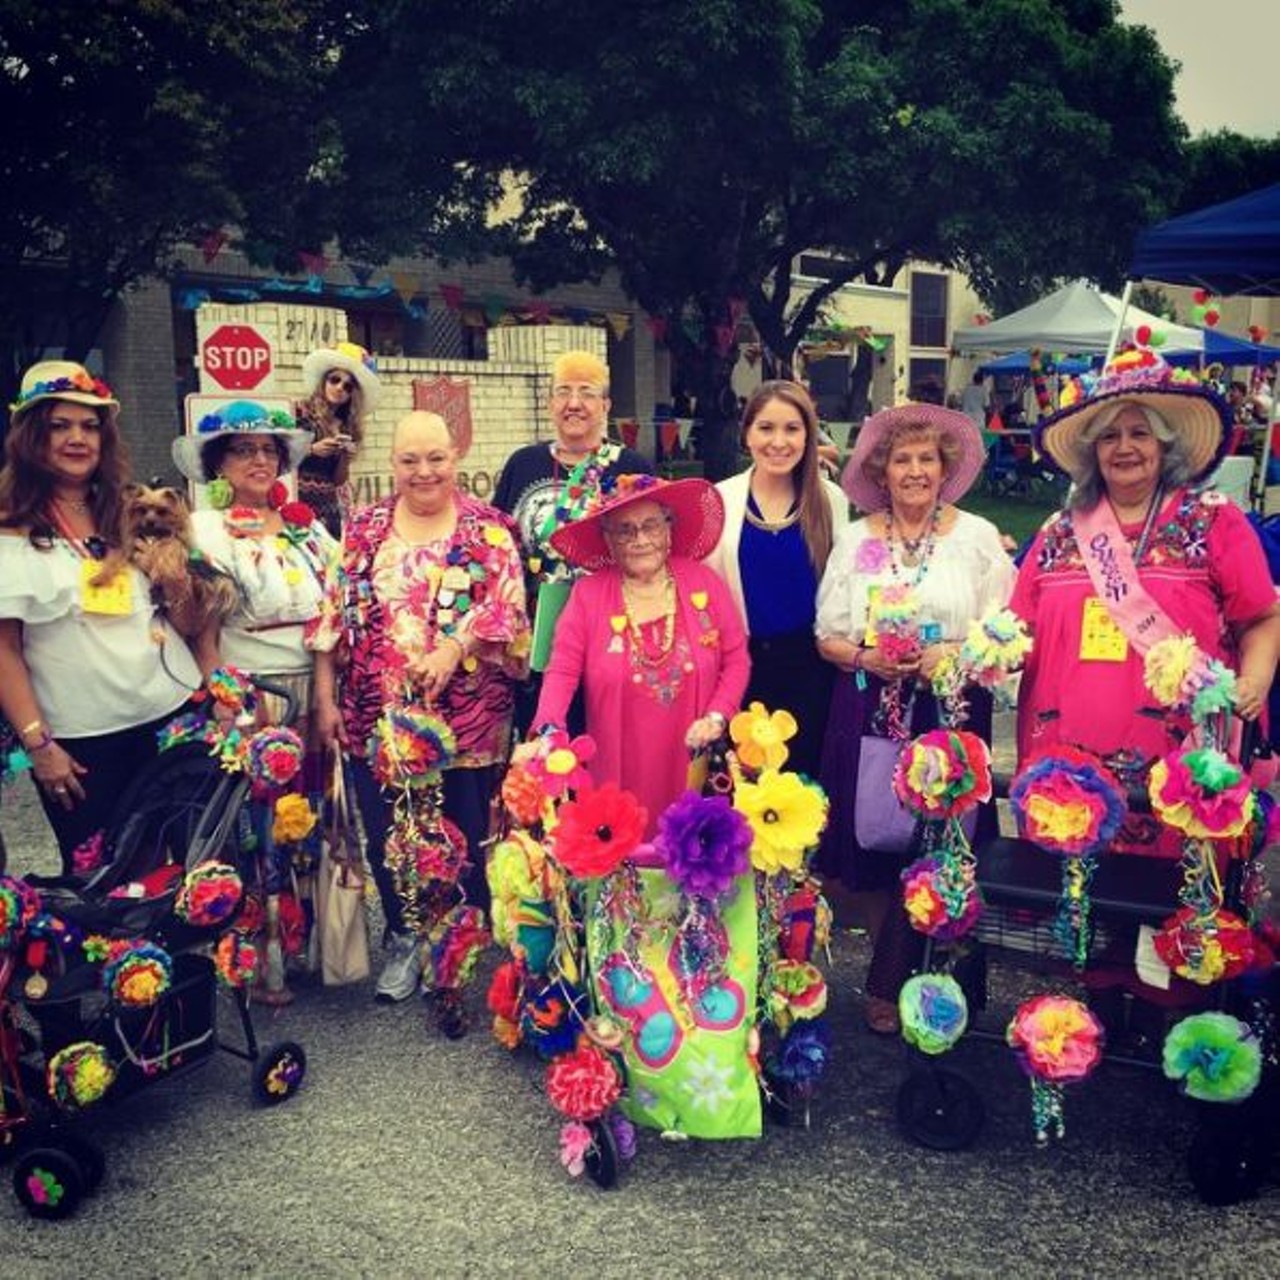 Senior Fiesta
9 a.m. to 1 p.m. April 21 at Wonderland of Americas Mall
This is the only official Fiesta event for the city&#146;s senior population (55+). Baby boomers can enjoy live entertainment, dancing and special guest appearances. Door prizes and free promotional items will be given out throughout the event.
Photo via Instagram, marianaveraza